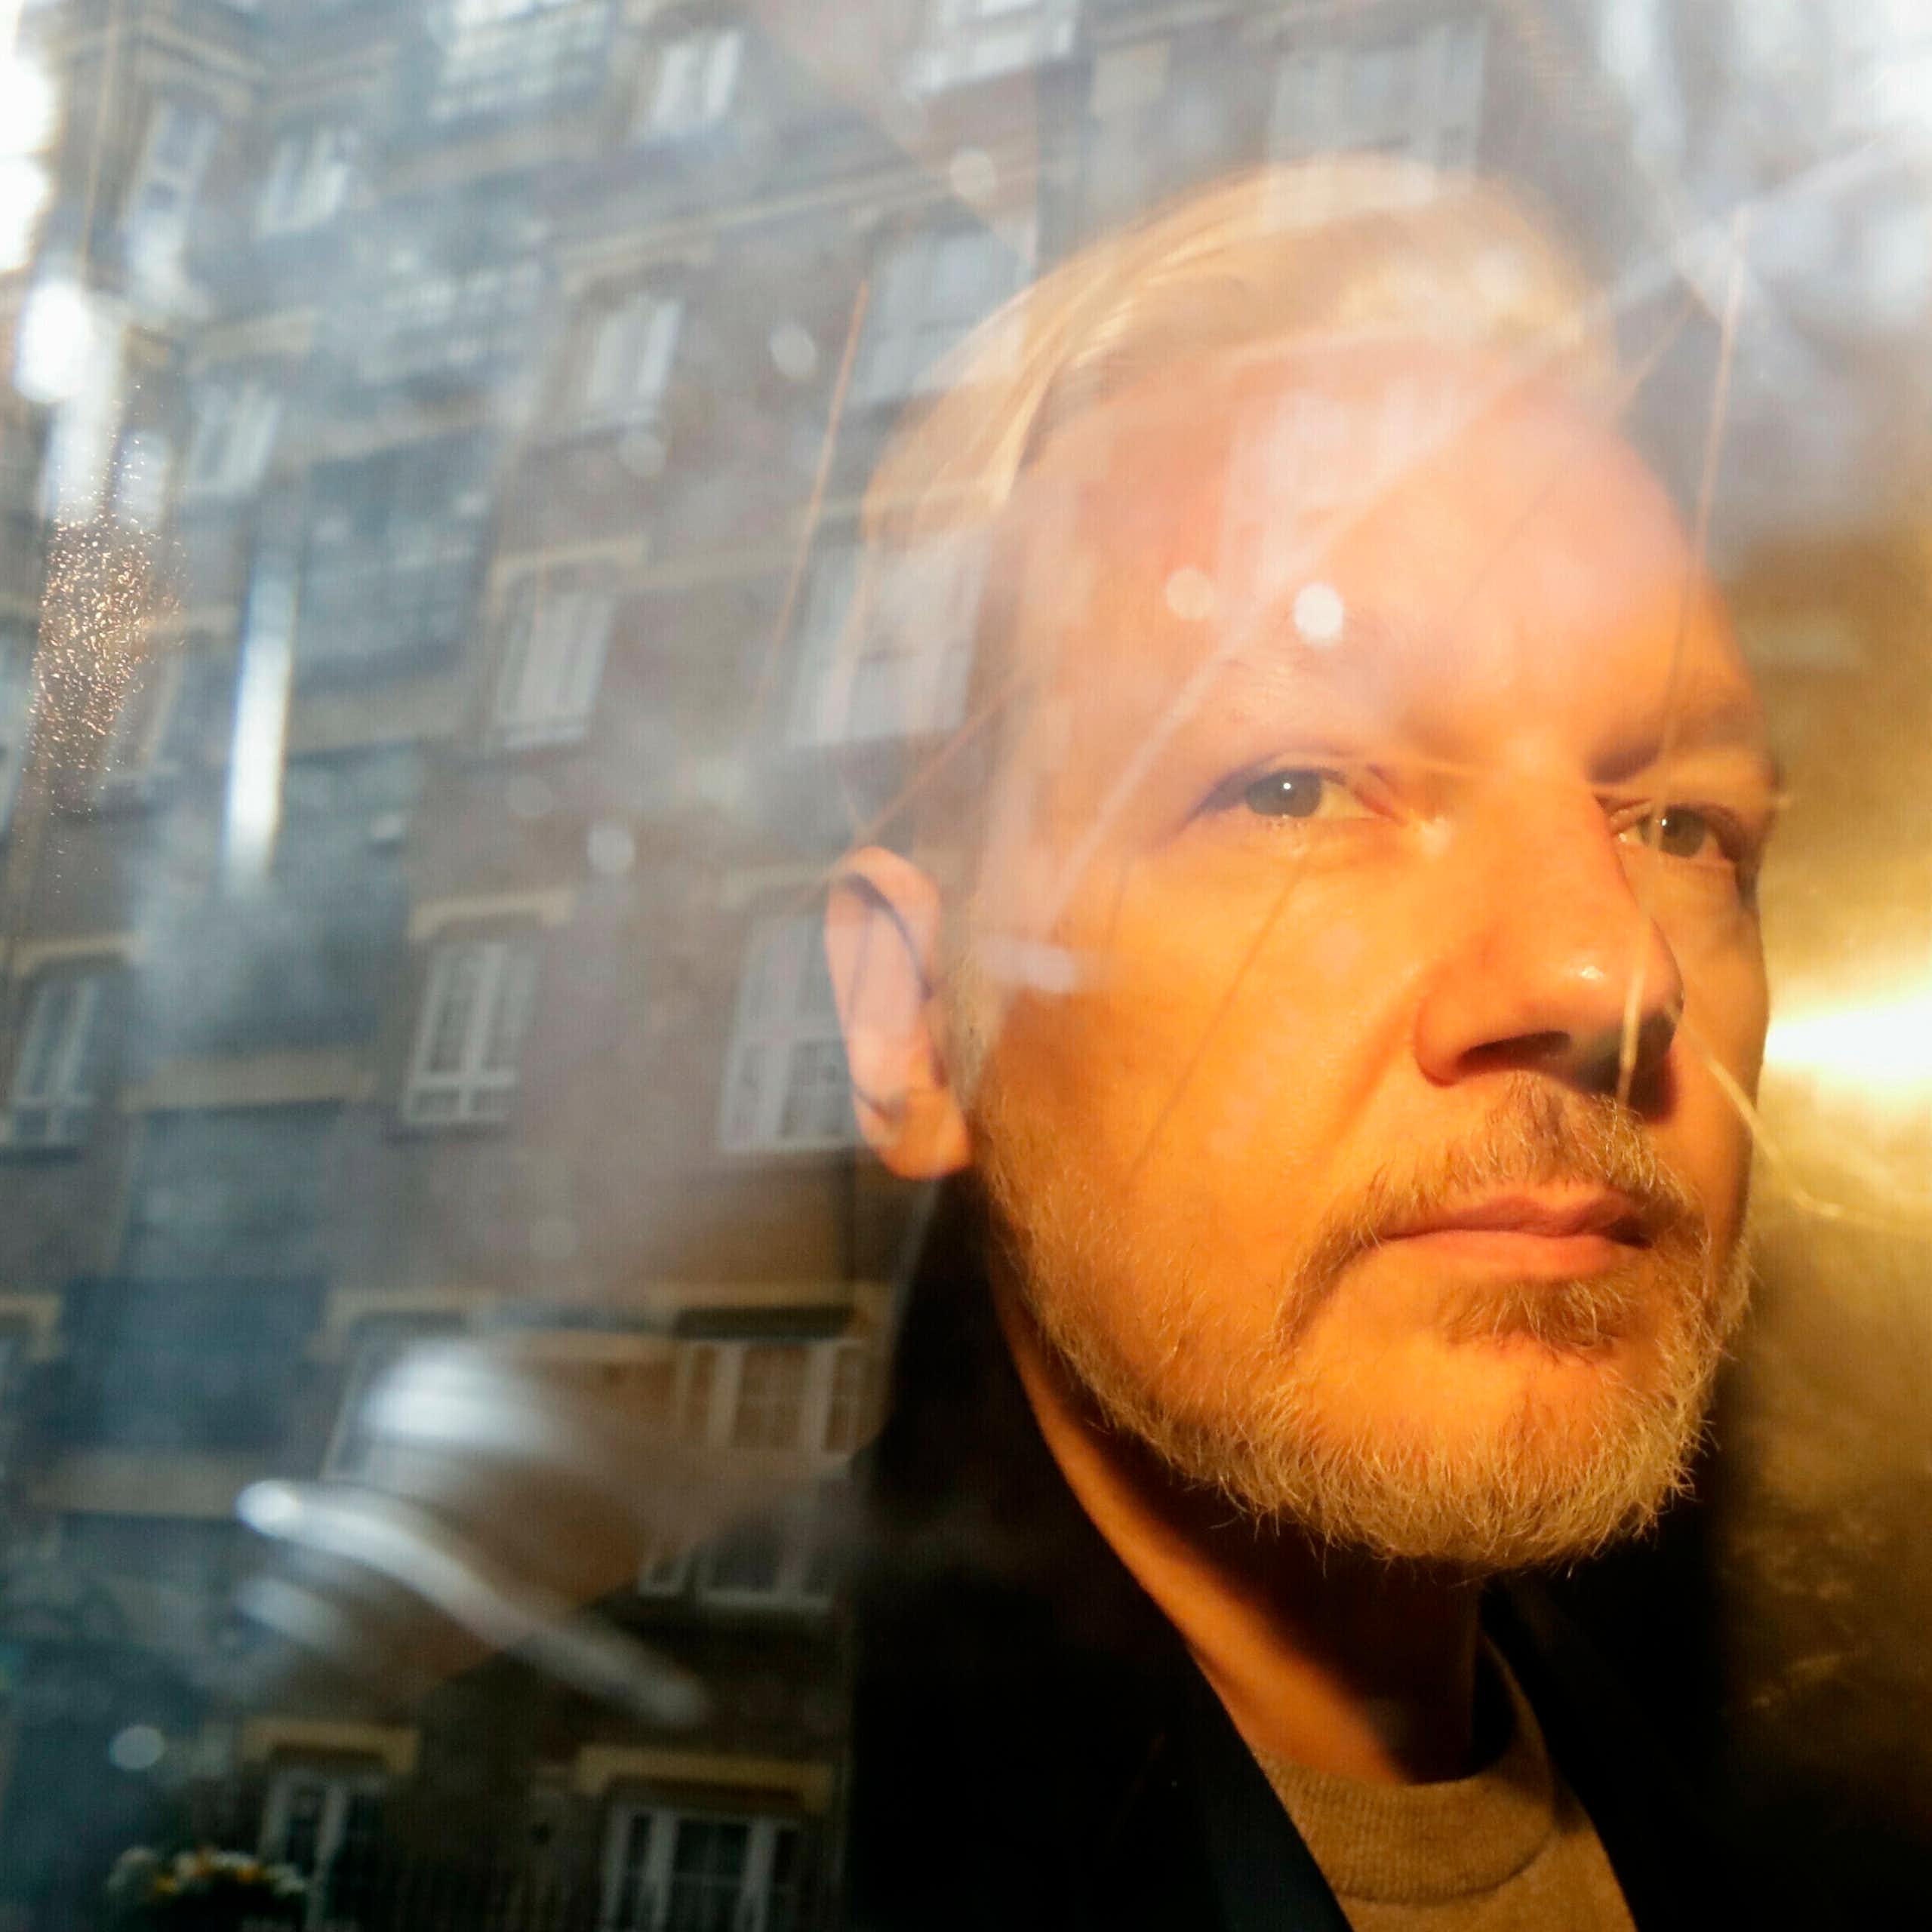 Julian Assange’s appeal to avoid extradition will go ahead. It could be legally groundbreaking